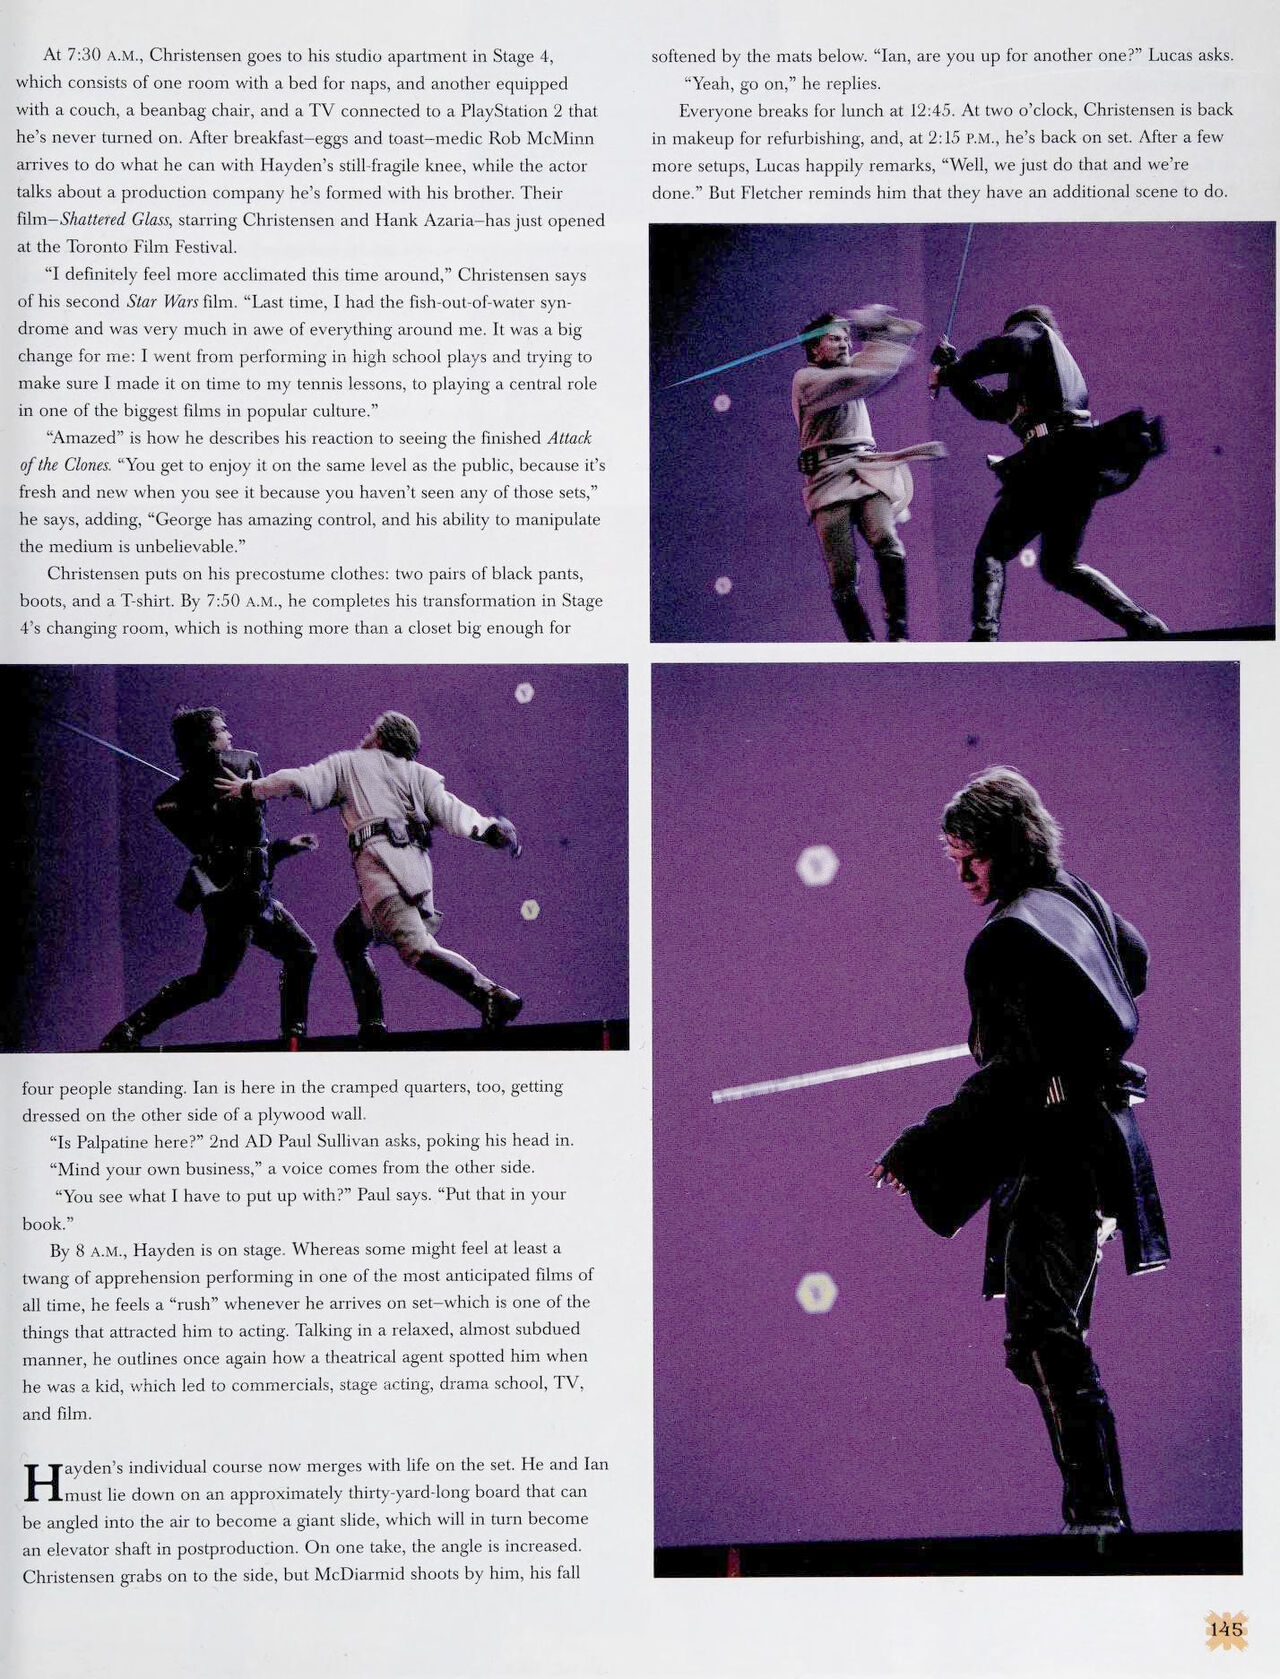 The Making of Star Wars: Revenge of the Sith 146